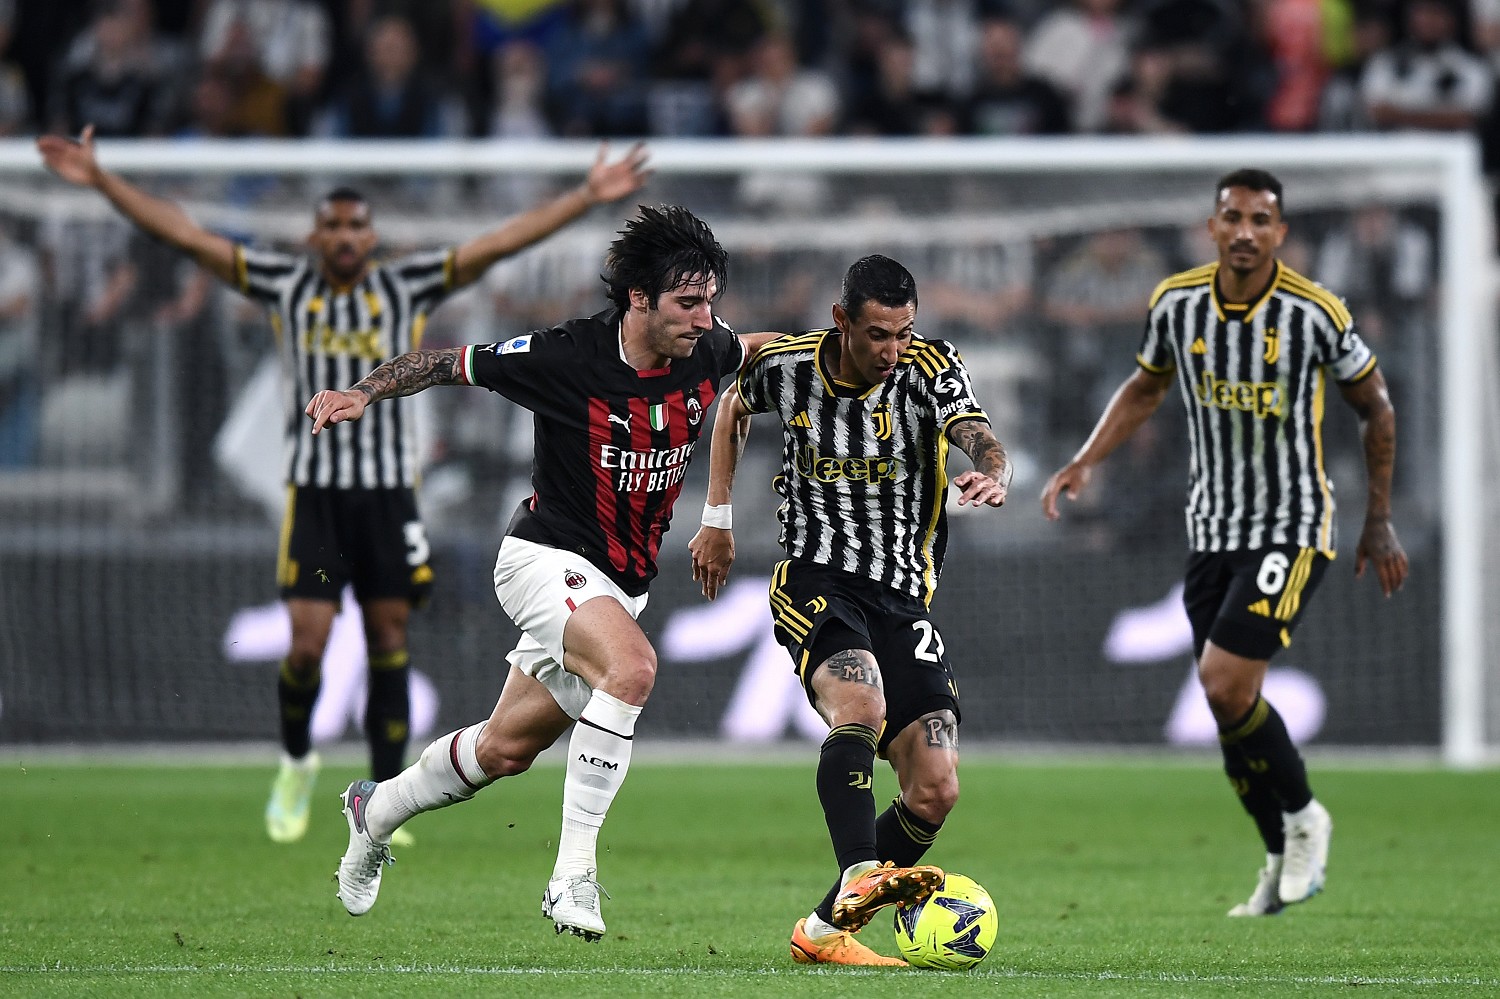 Here are our player ratings for Juventus who extended their calamitous week with a 0-1 defeat to Milan at the Allianz Stadium